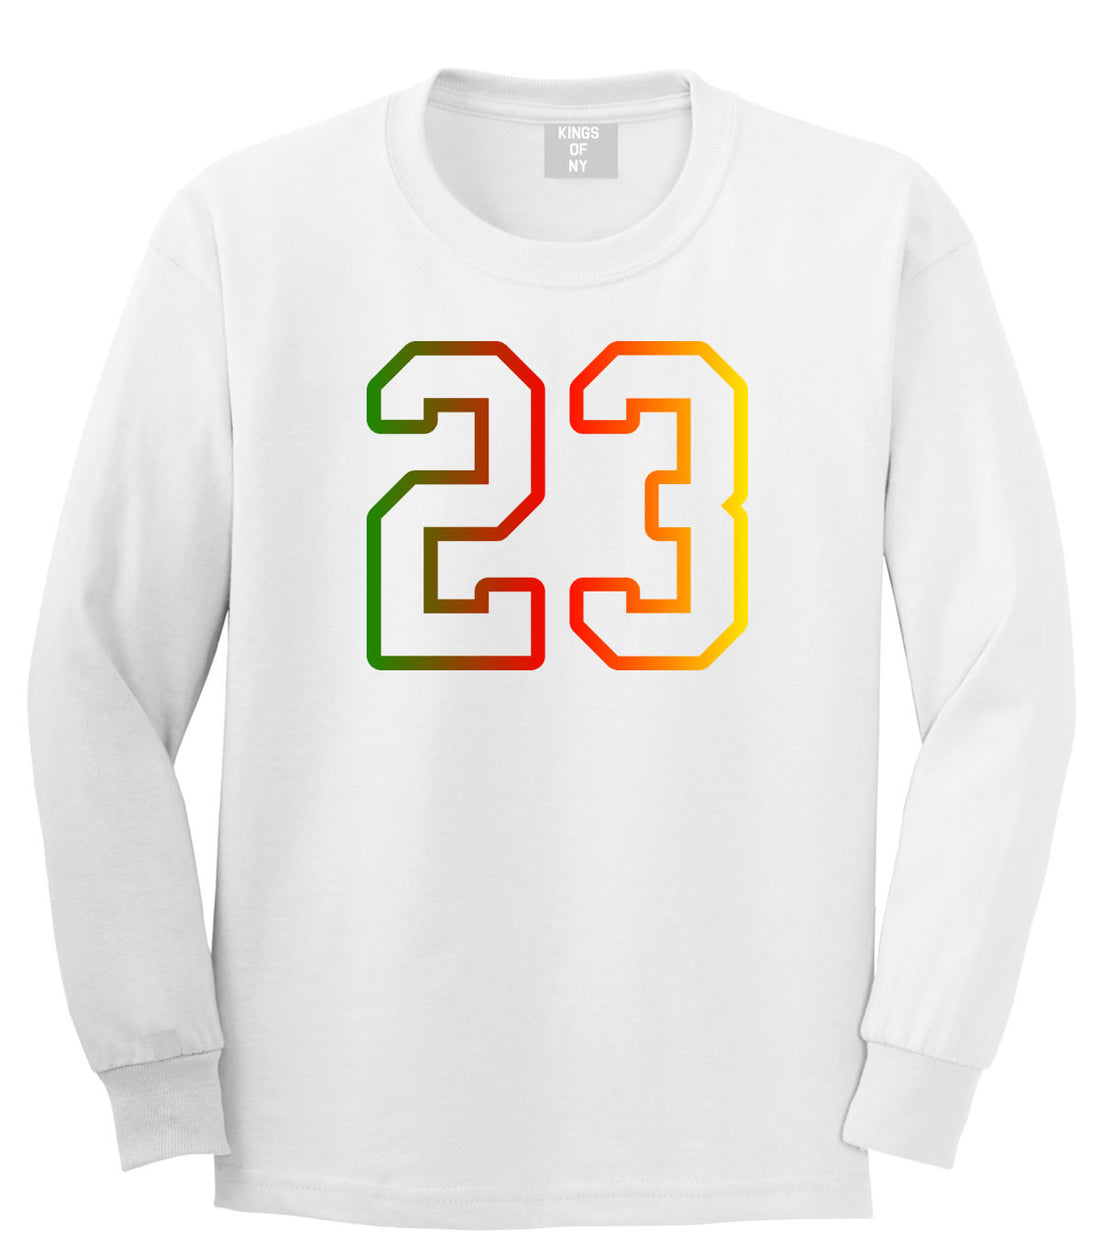 23 Cement Print Colorful Jersey Long Sleeve T-Shirt in White By Kings Of NY